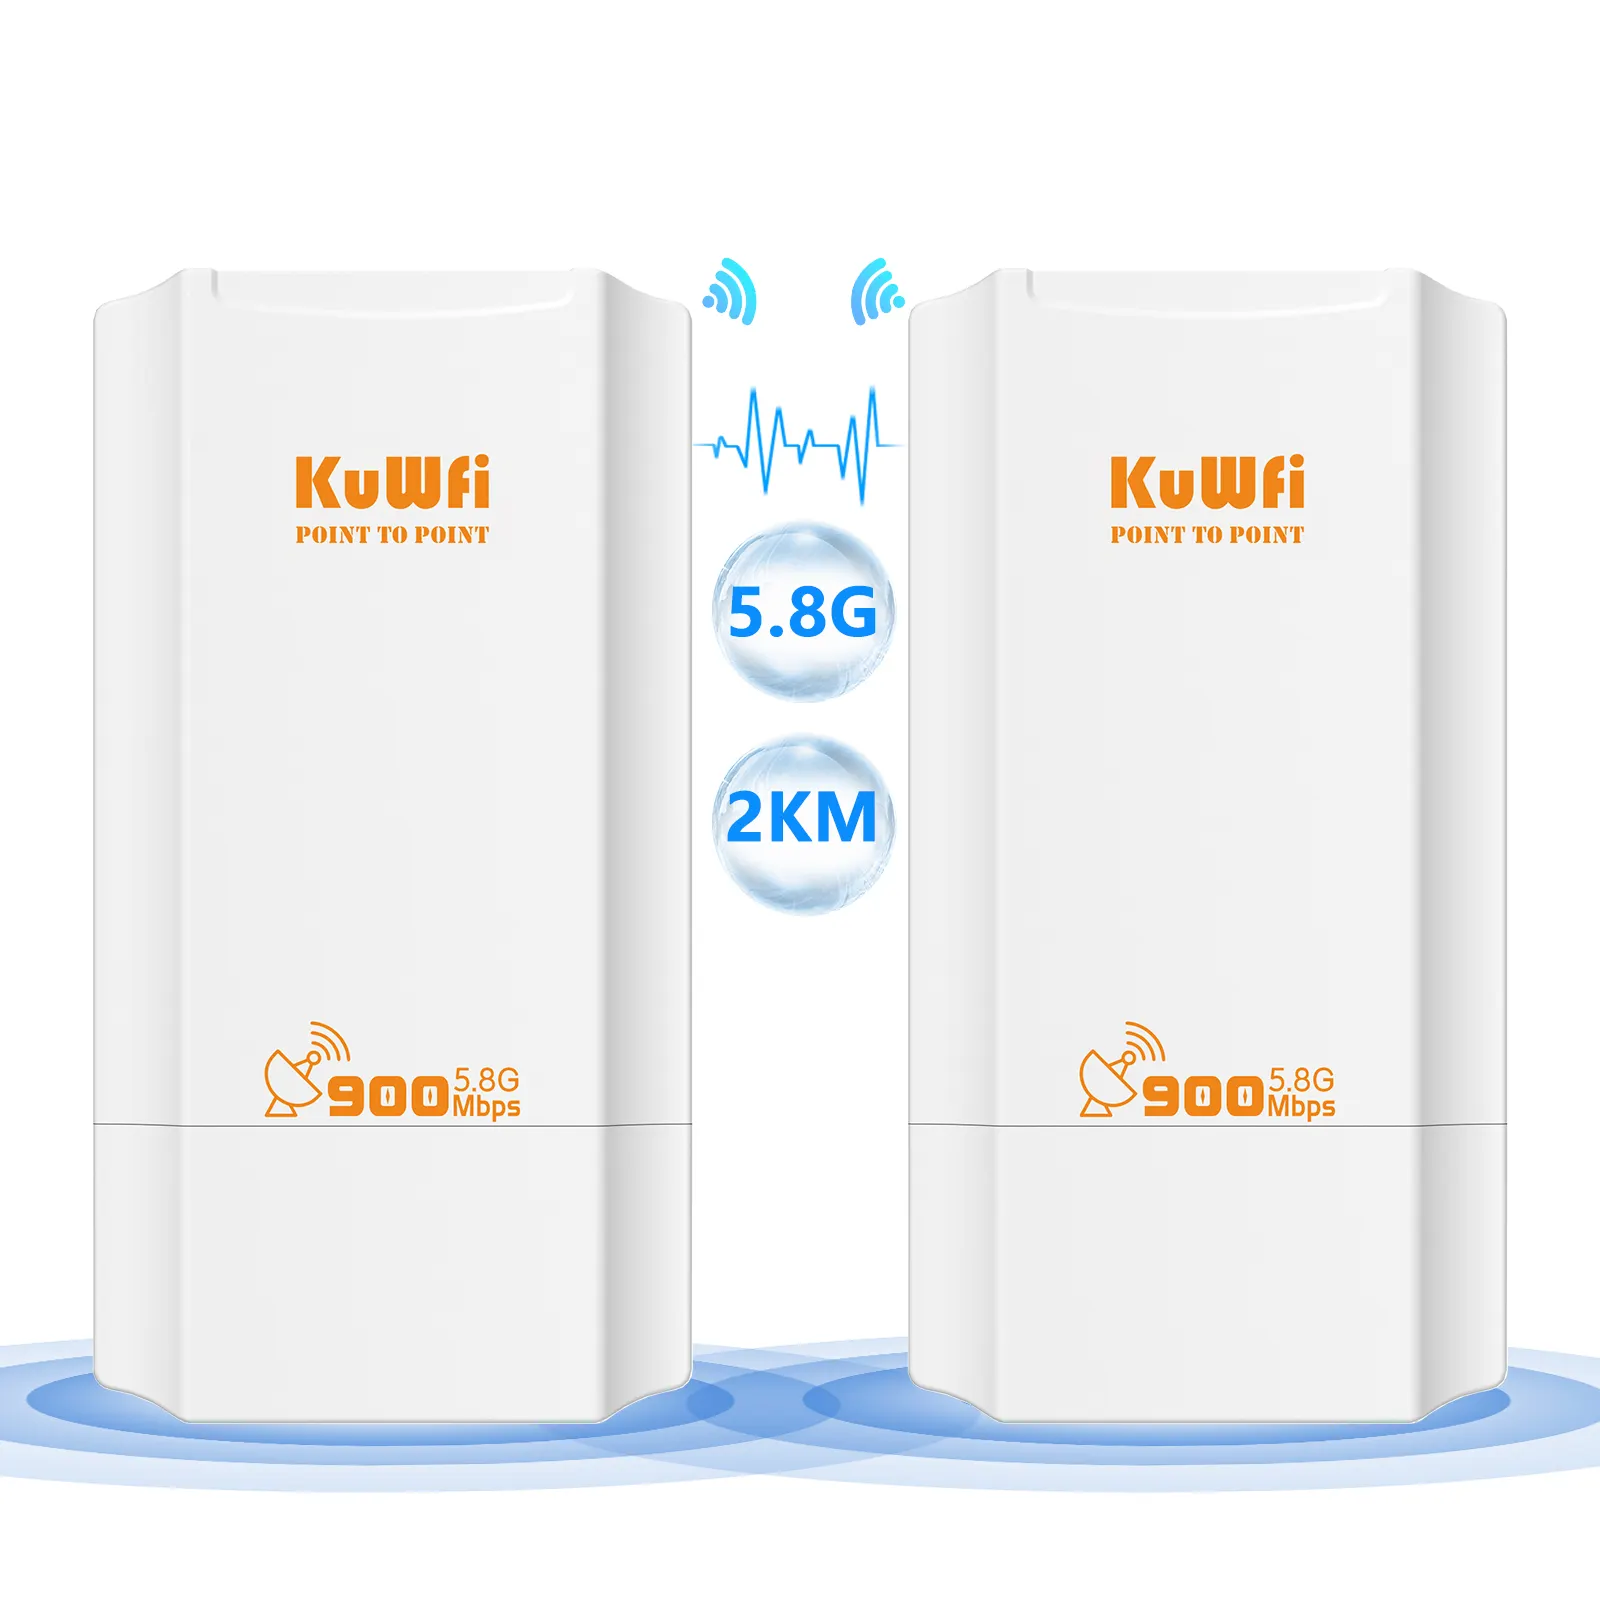 KuWFi CPE130 Wi-Fi Cable Módem 900Mbps AP Repetidor con PoE Data Firewall VoIP Compatible 5,8G Frecuencia 5g Puente inalámbrico